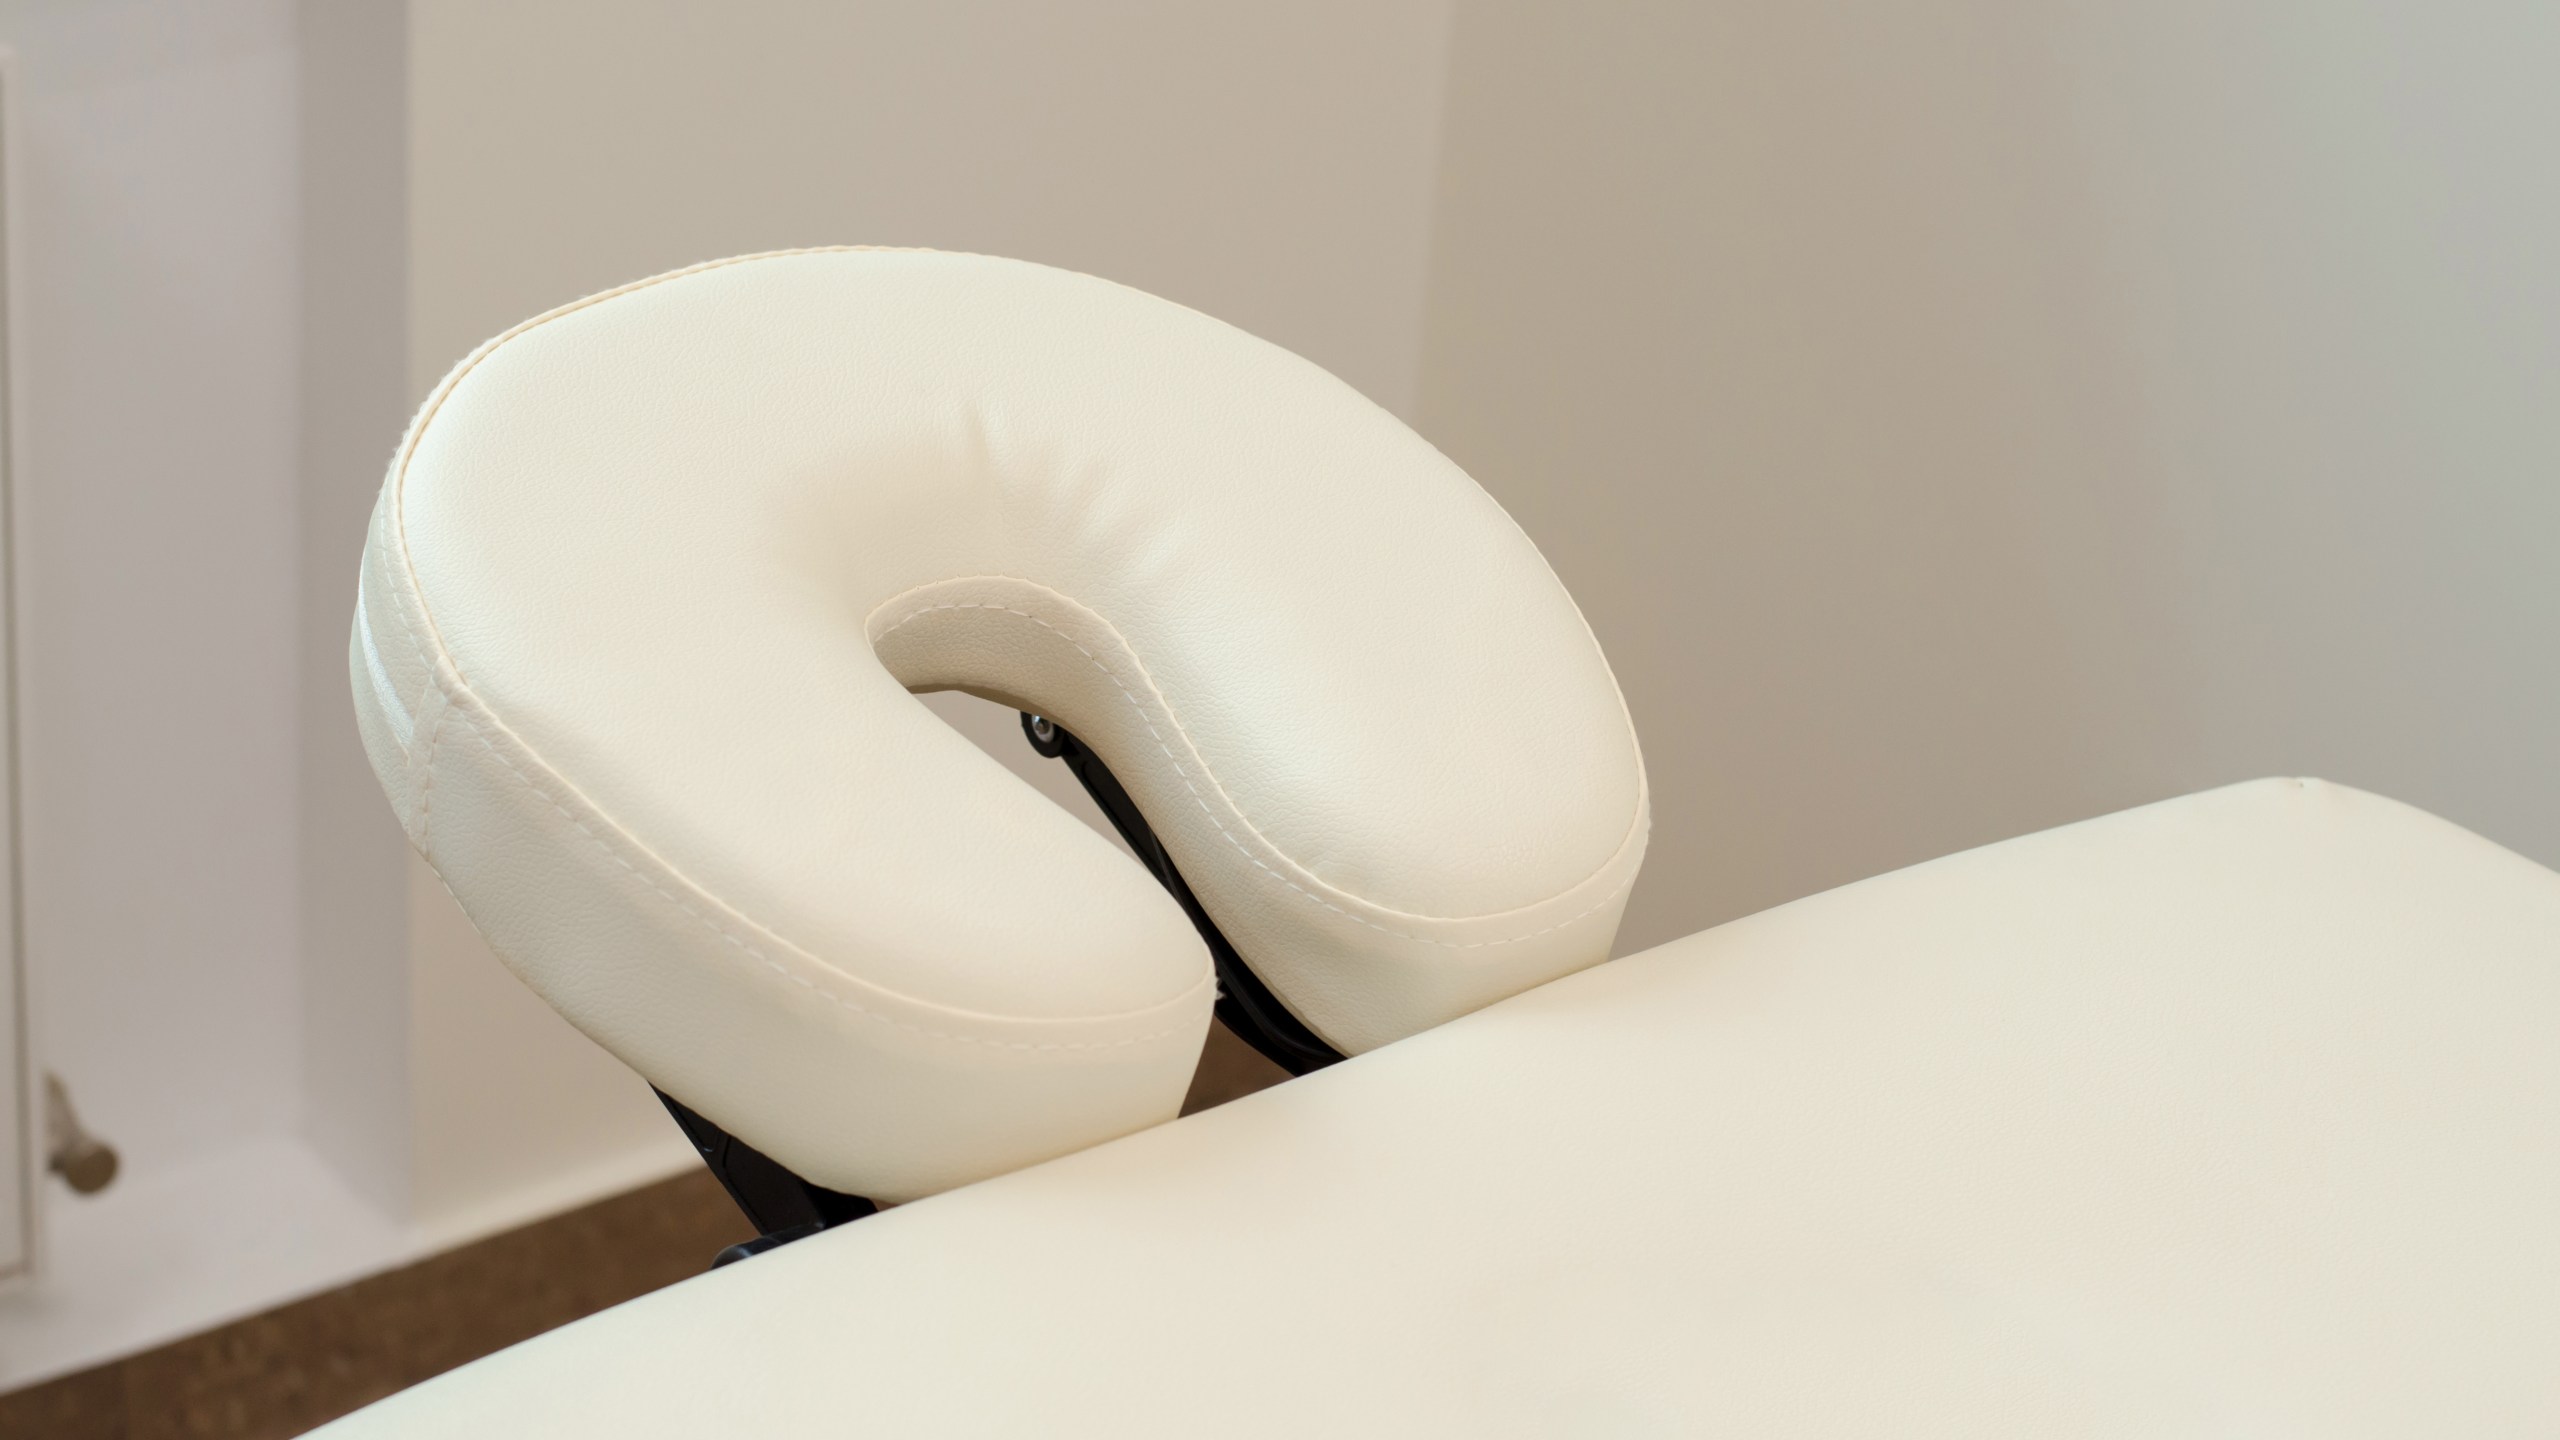 A headrest on a massage is seen in a file photo. (Getty Images)